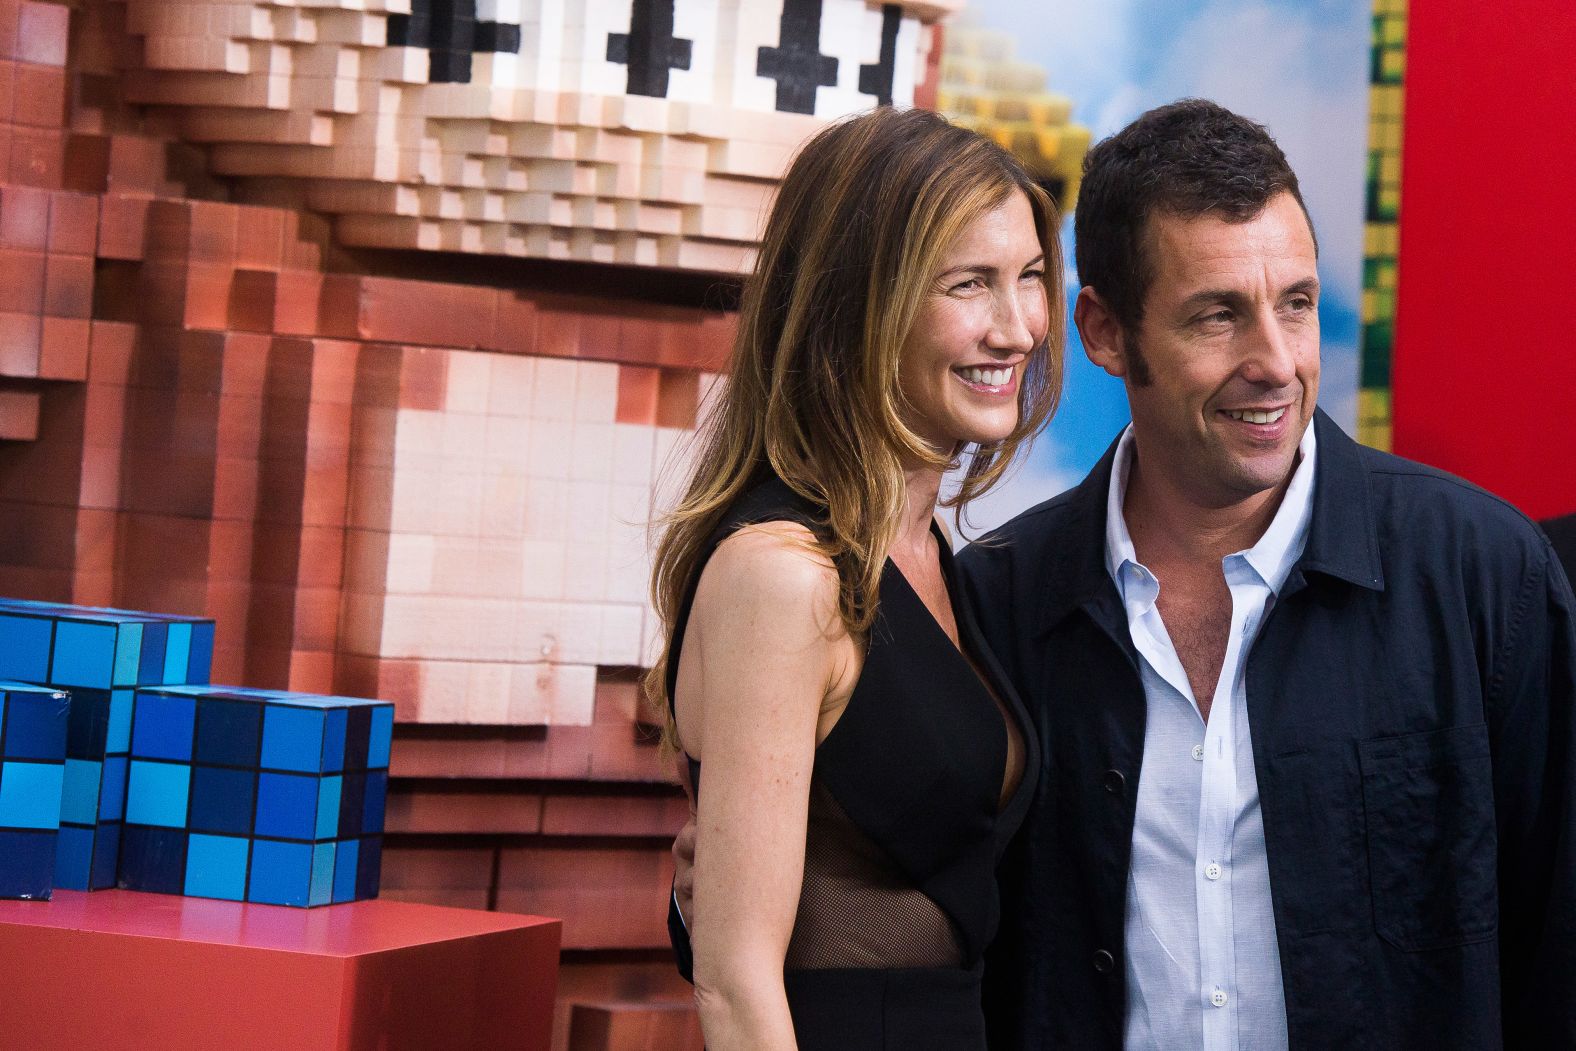 Sandler and his wife, Jackie, attend the "Pixels" premiere in July 2015.